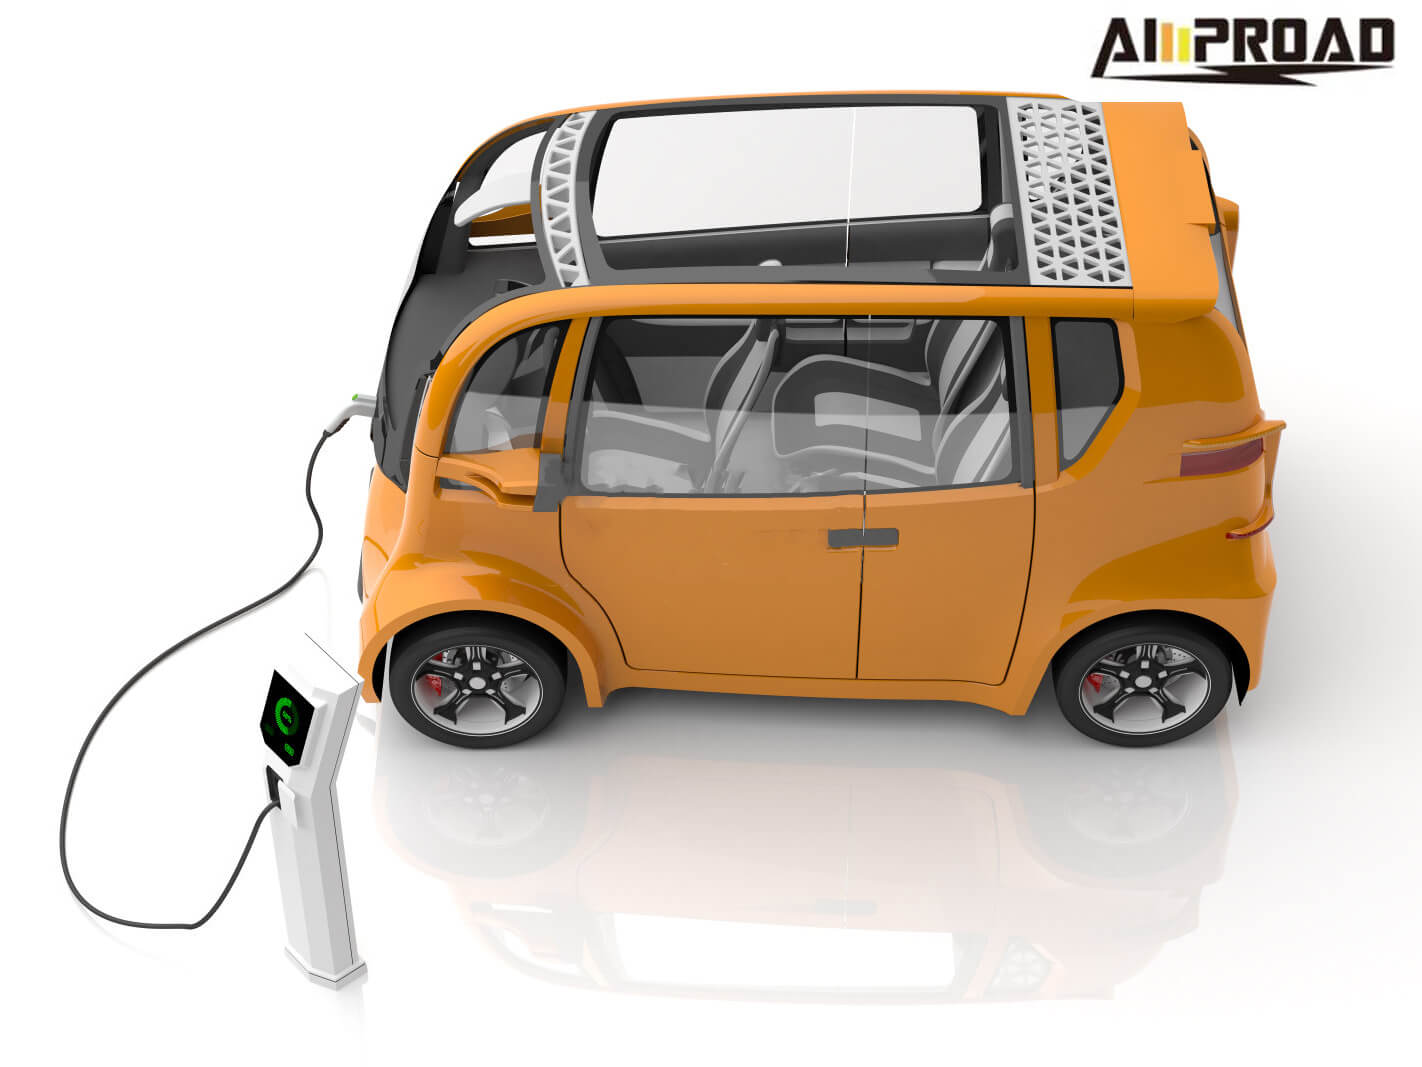 How to Install Electric Vehicle Charging Station?